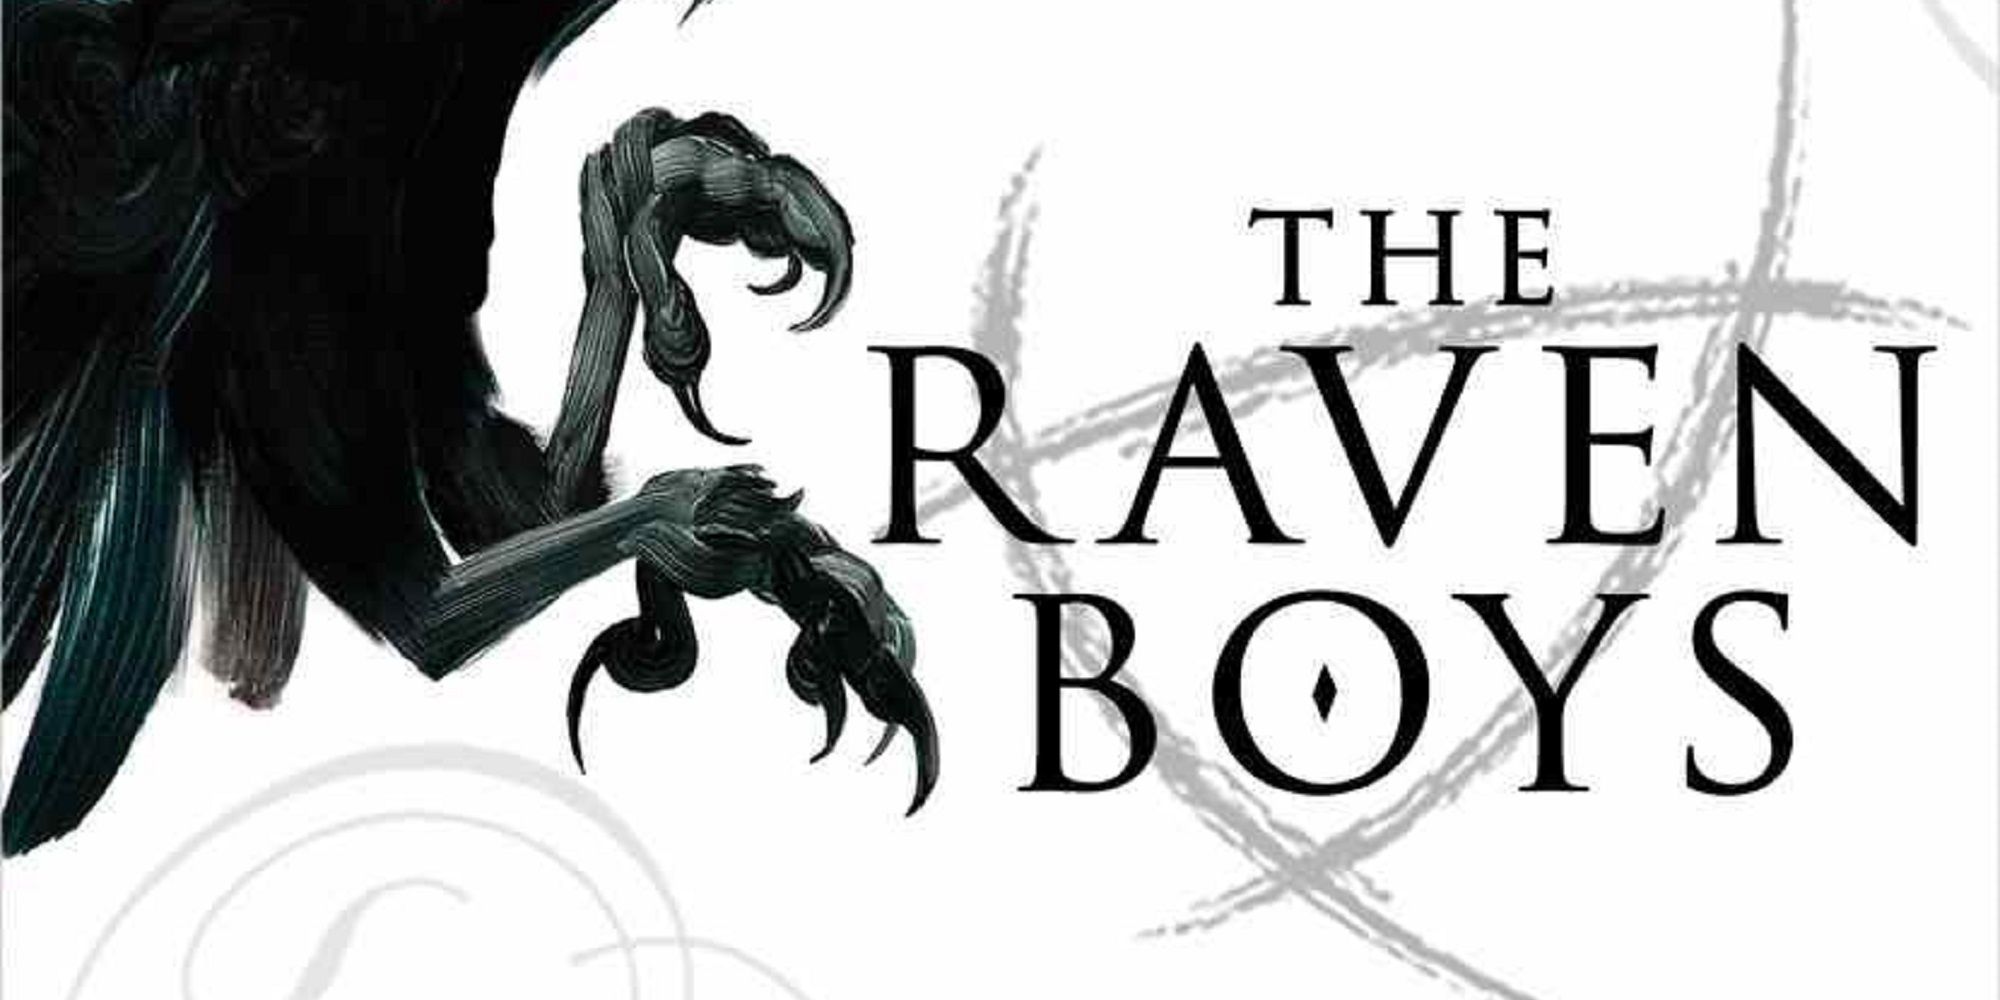 The Raven Boys book cover by Maggie Stiefvater.